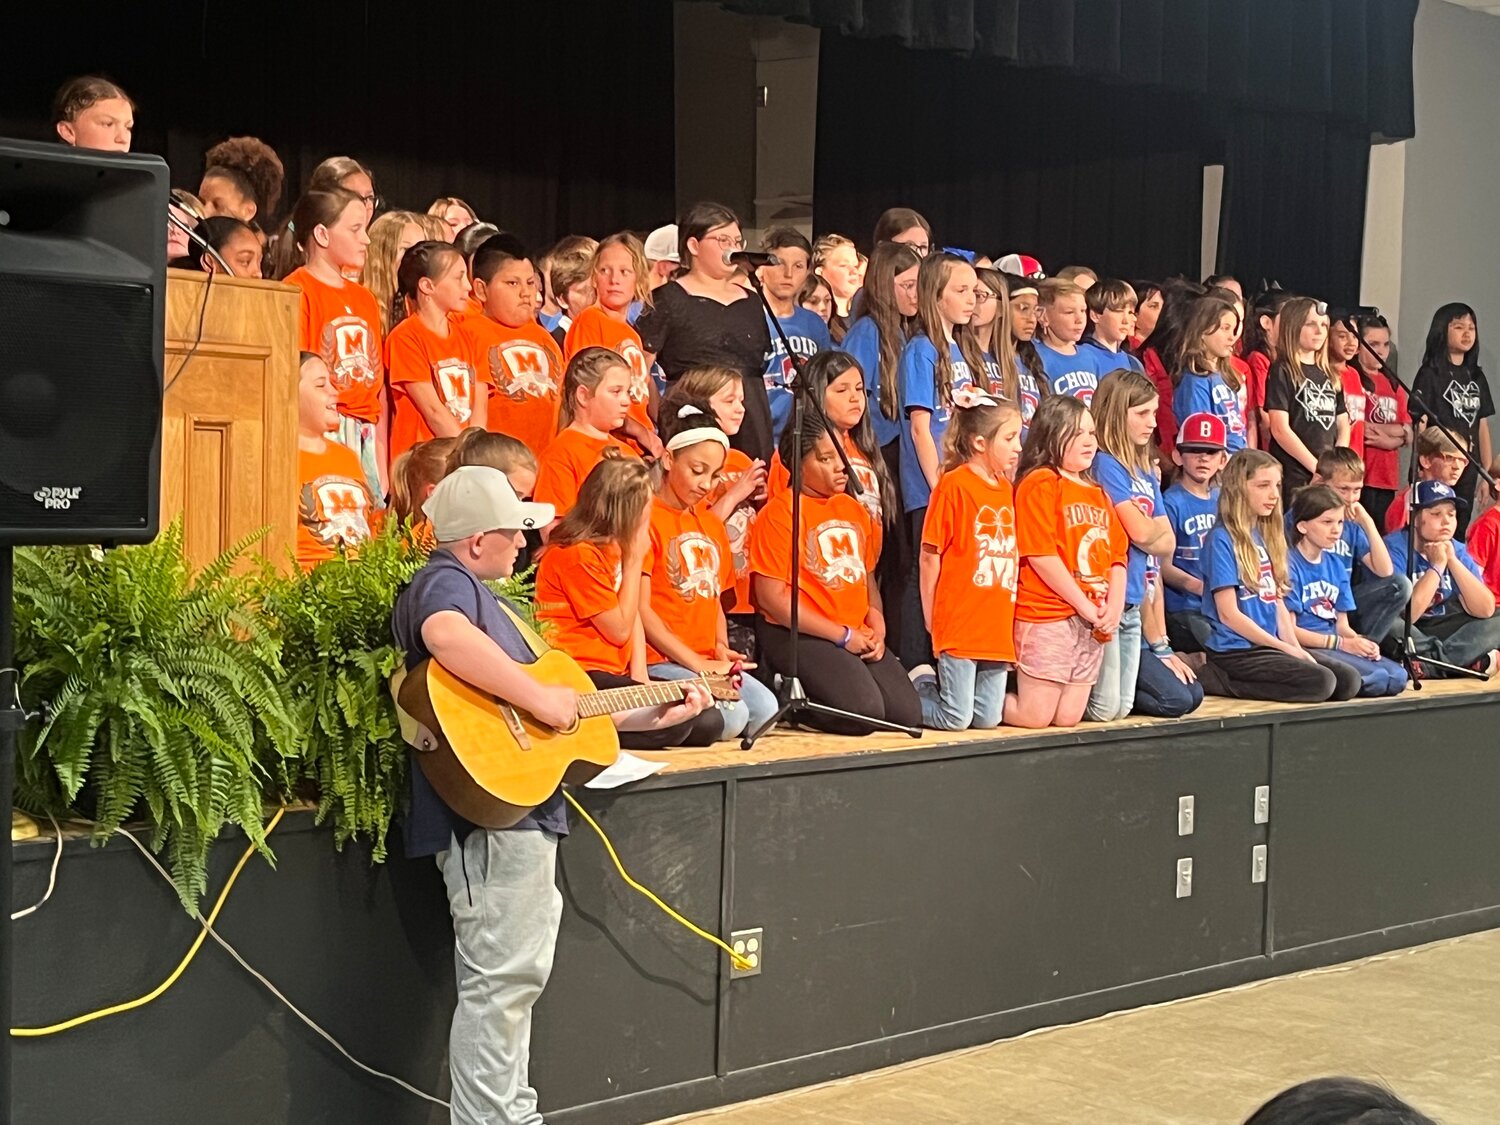 Quitman, Mineola and Winnsboro elementary school choirs combined to sing at this year’s Candlelight Vigil honoring April as Child Abuse Awareness Month, Tuesday, April 25 at Quitman’s Carroll Green Civic Center.